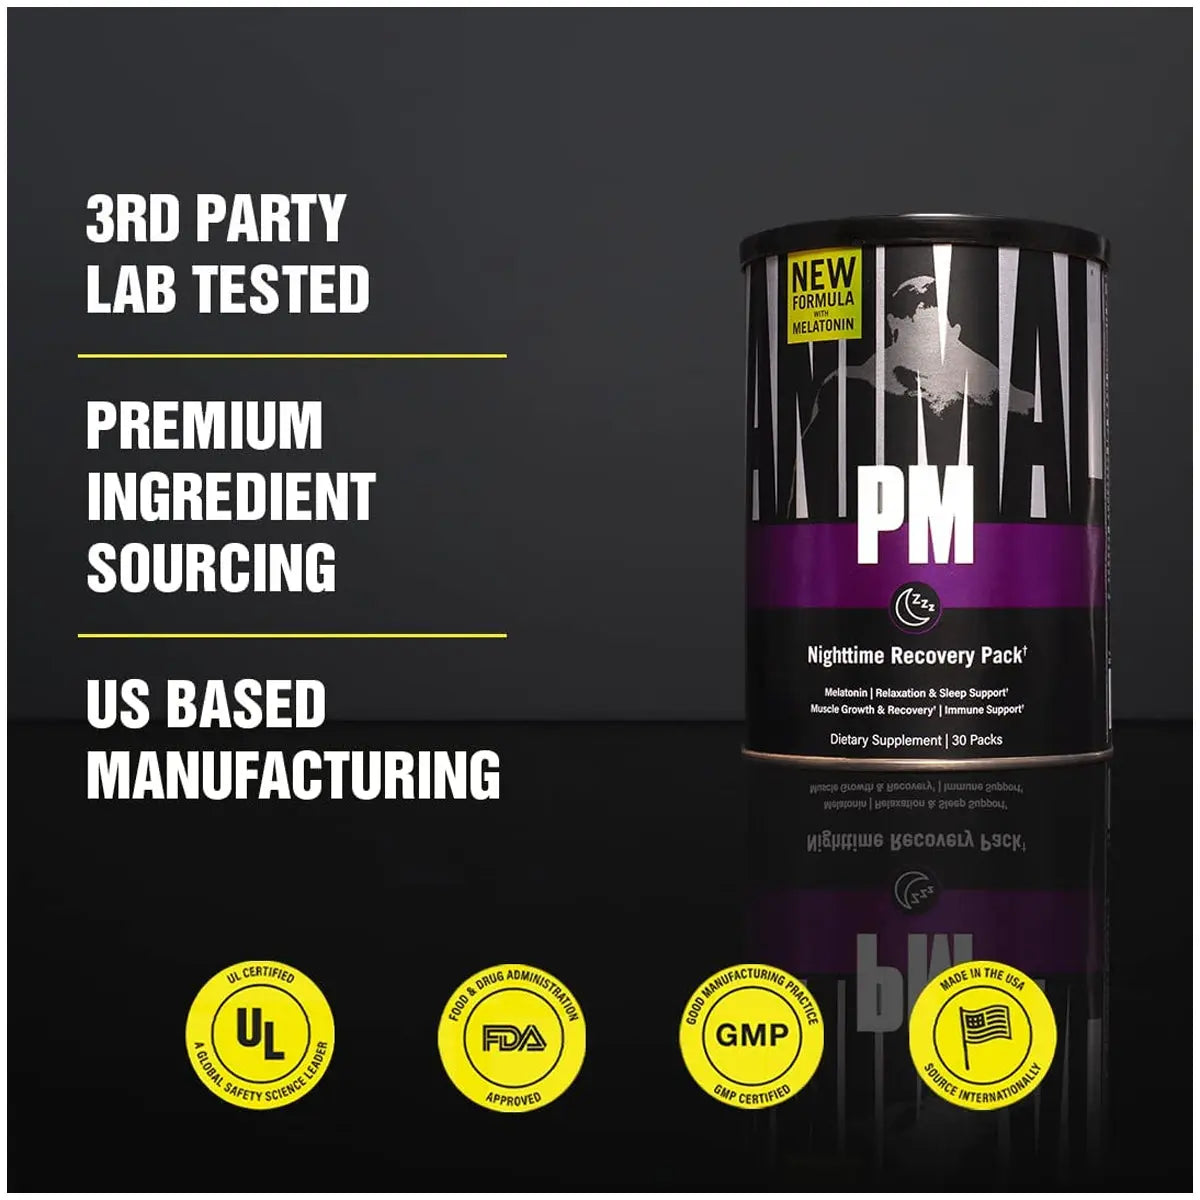 Universal Nutrition Animal PM Sleep Support Supplement - 30 Servings Universal Nutrition